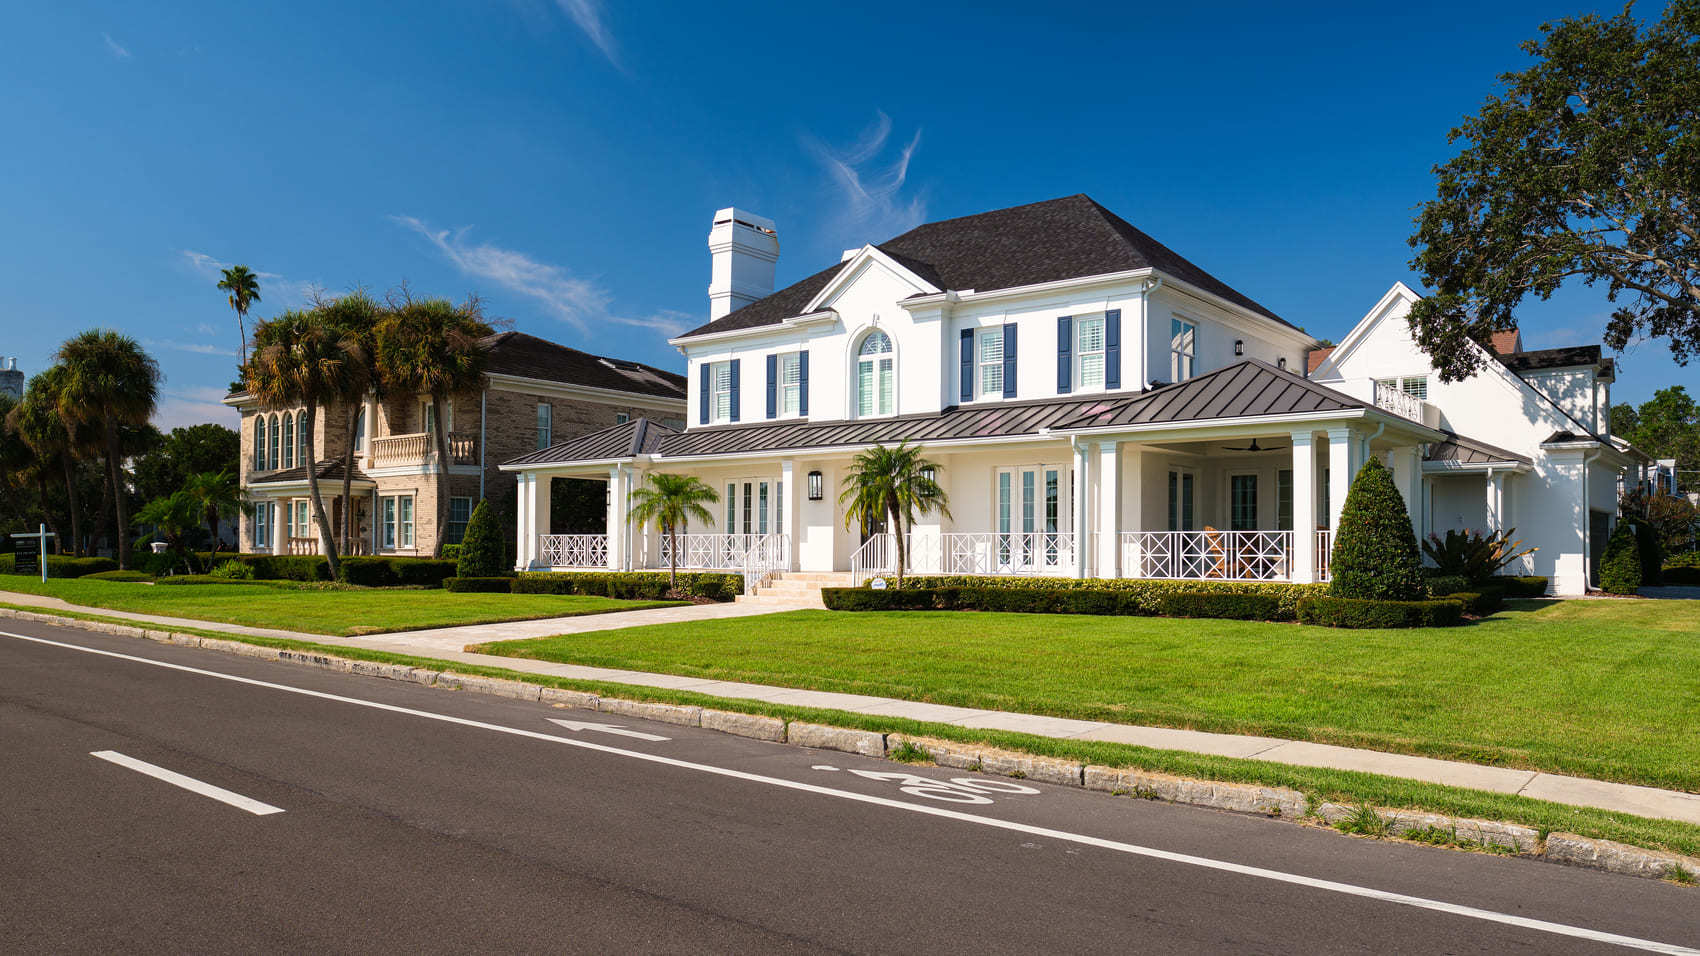 A stunning white home from the street in Tampa, Florida.